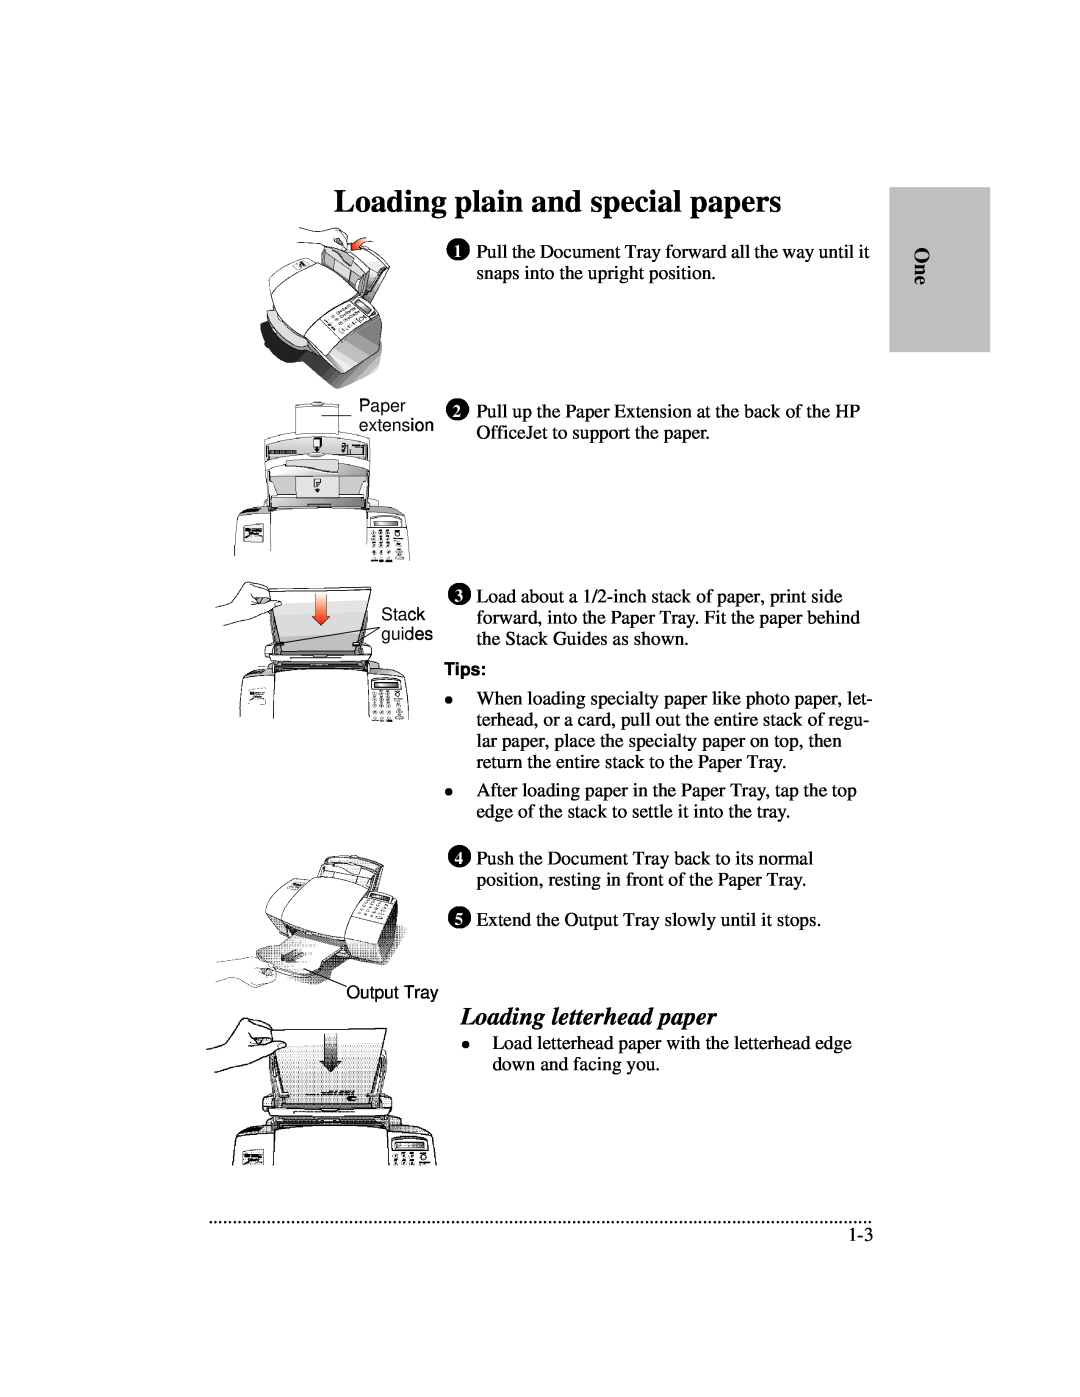 HP 700 manual Loading plain and special papers, Loading letterhead paper 